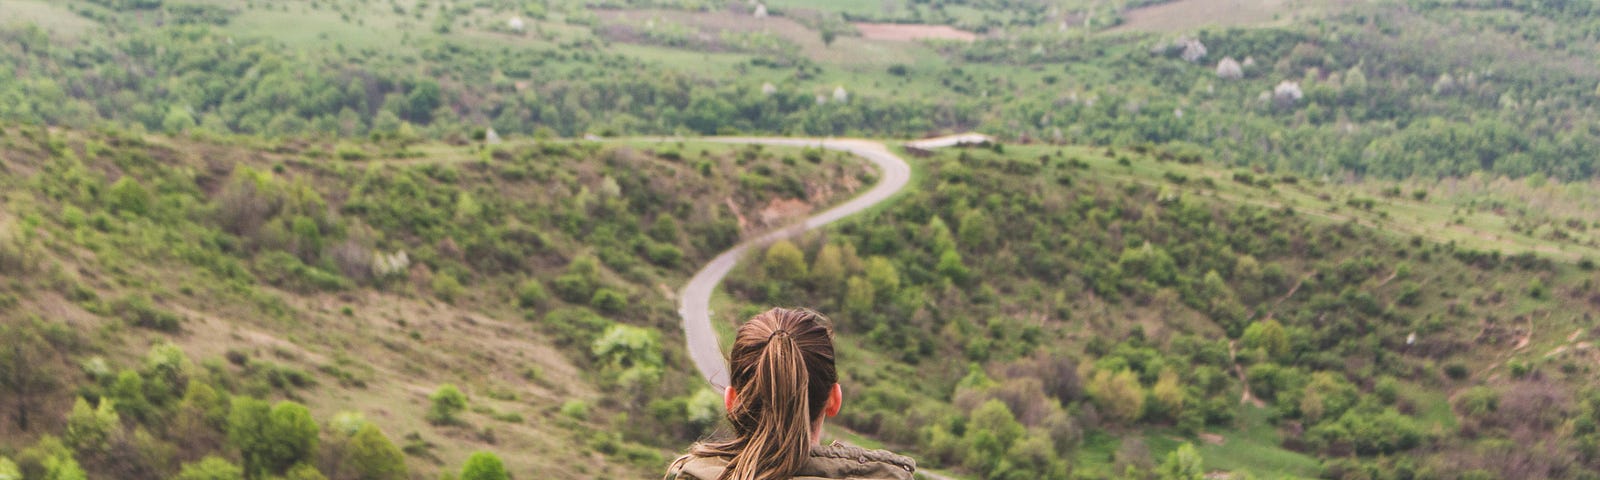 Woman sitting on a hill looking over a long winding road.